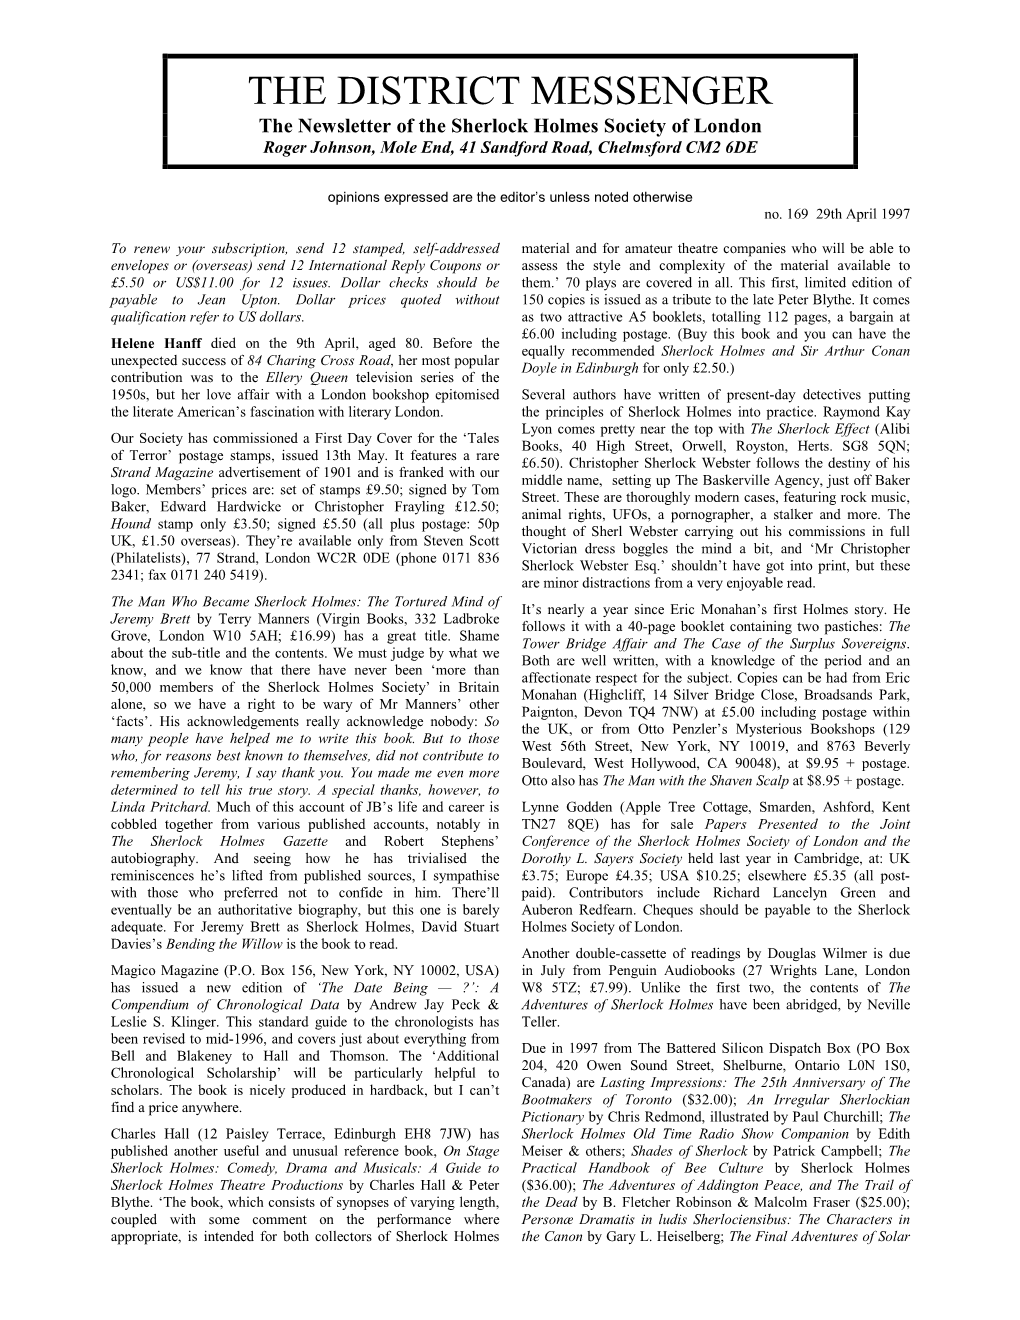 THE DISTRICT MESSENGER the Newsletter of the Sherlock Holmes Society of London Roger Johnson, Mole End, 41 Sandford Road, Chelmsford CM2 6DE